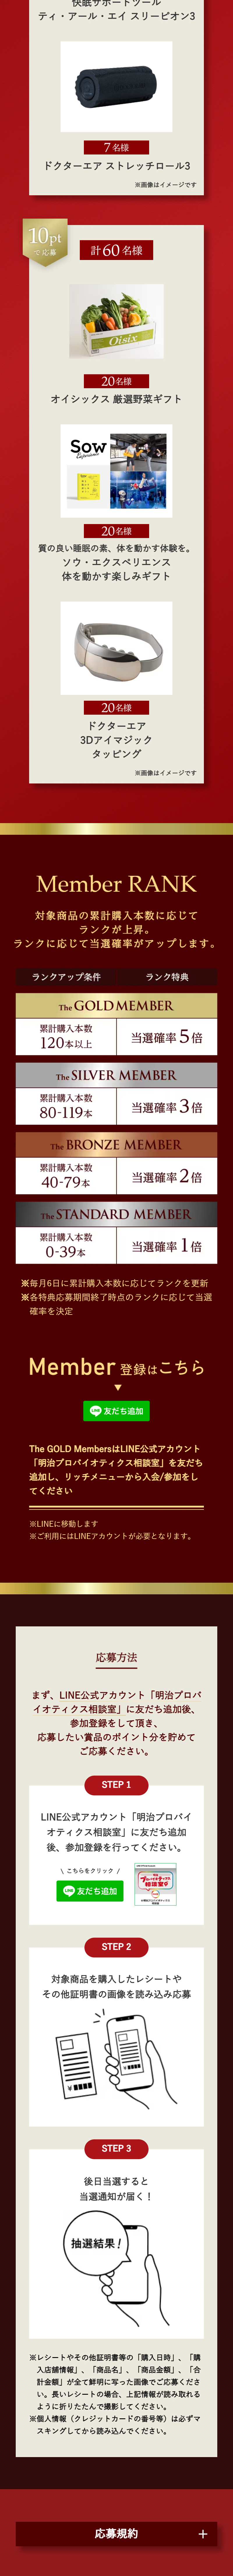 The GOLD Members_sp_2